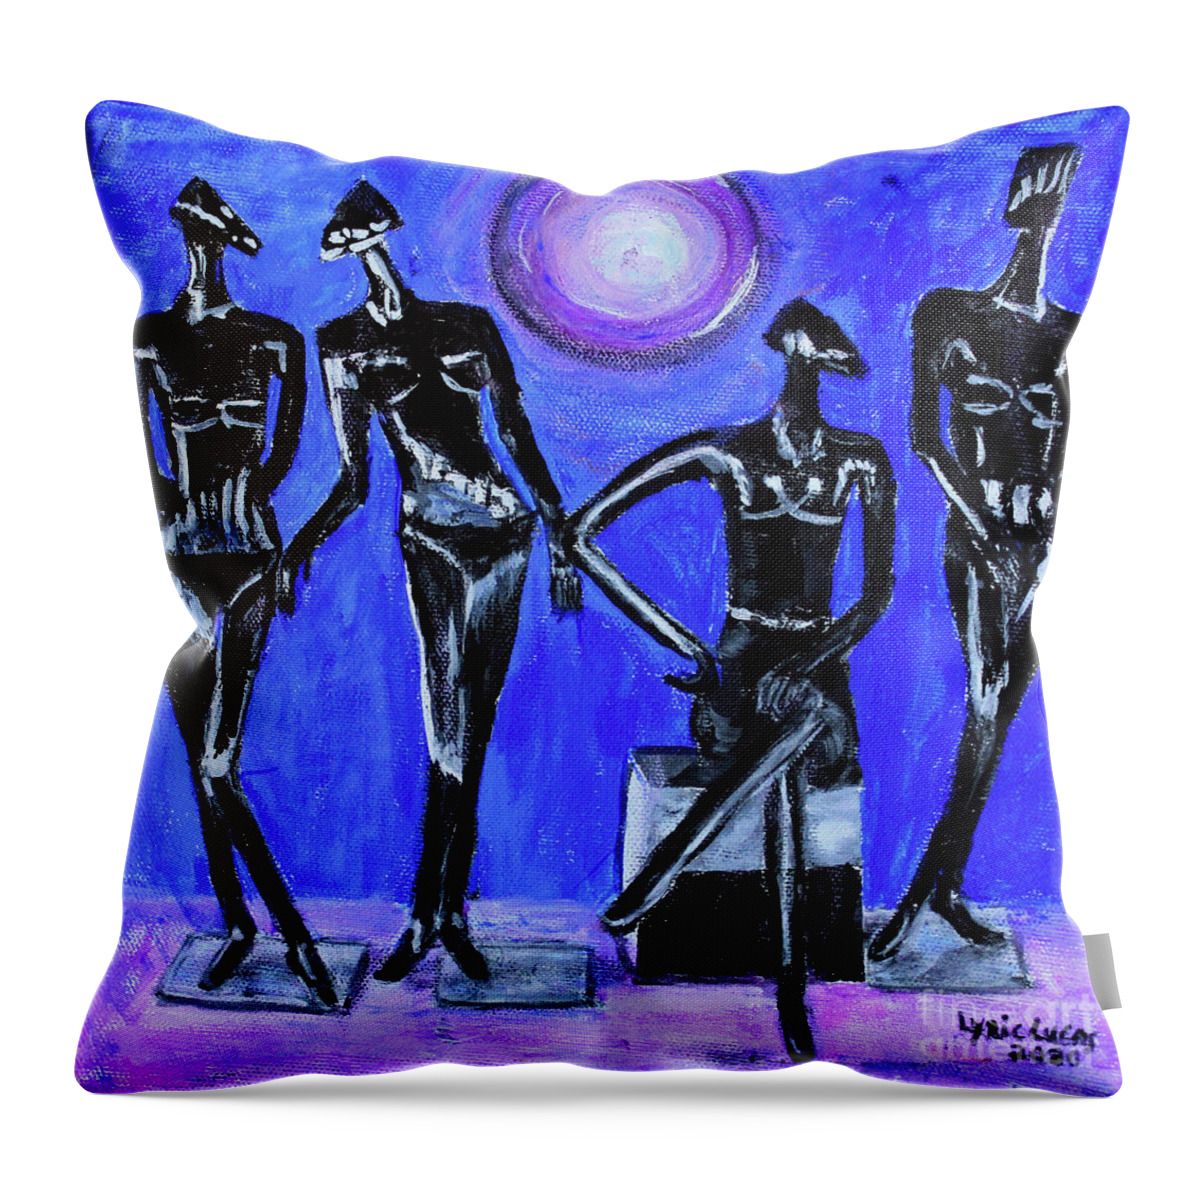 Abstract Throw Pillow featuring the painting Moonlight Tableau by Lyric Lucas